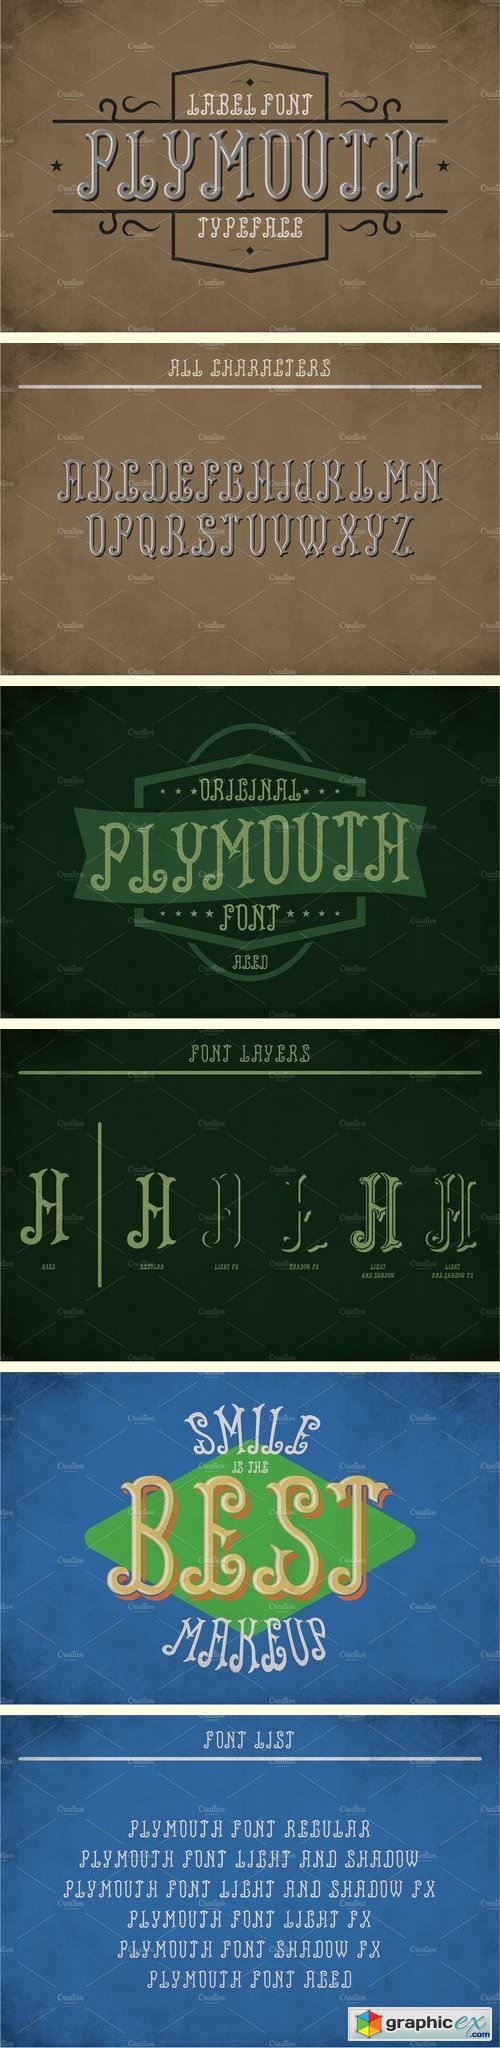 Plymouth Vintage Label Typeface